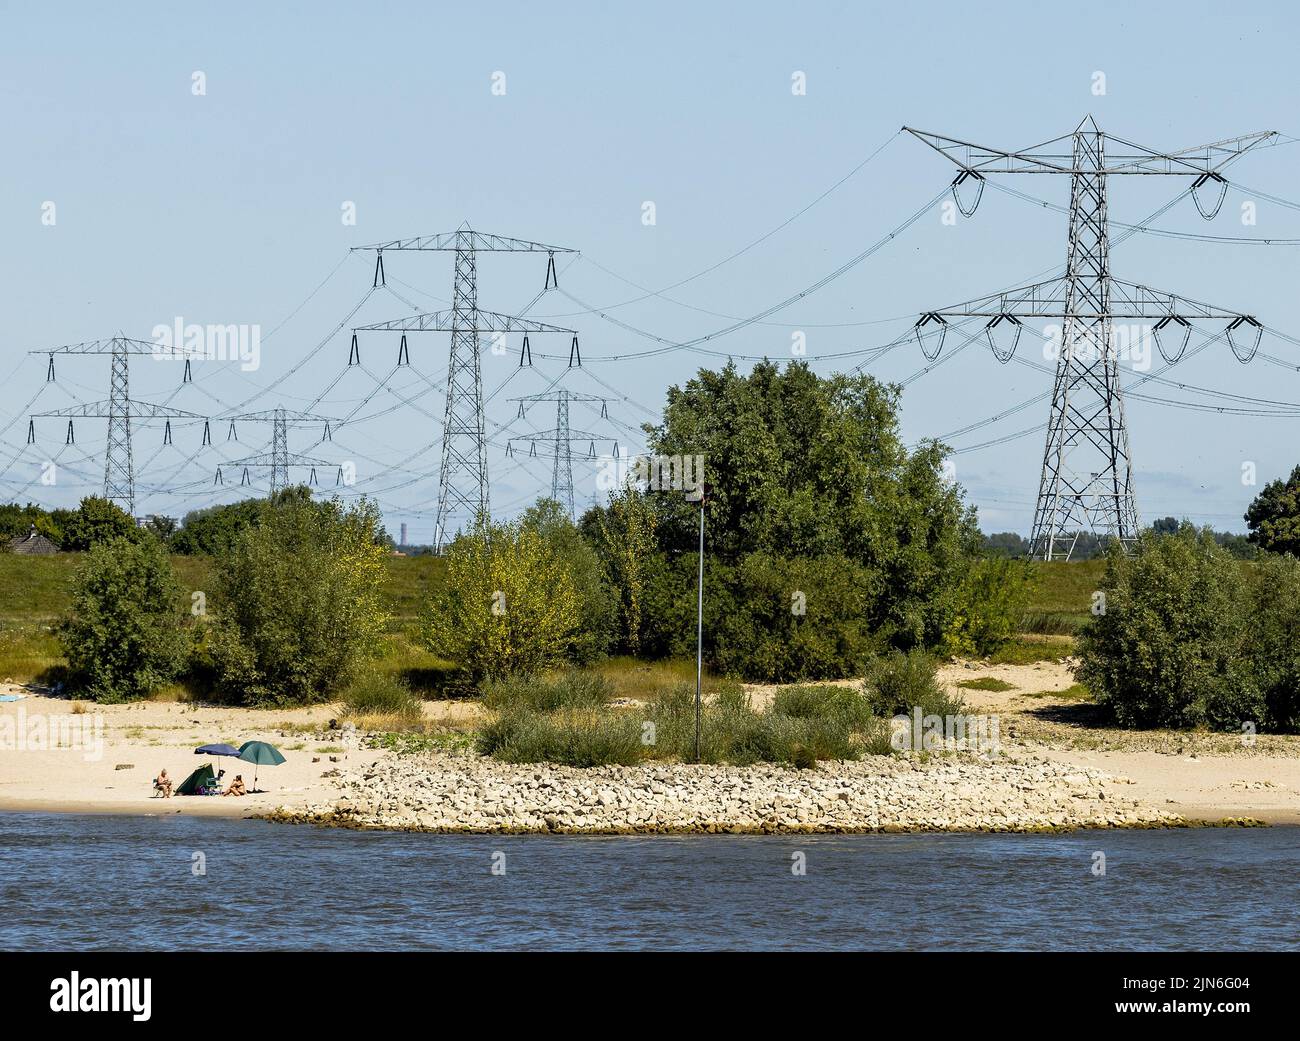 2022-08-09 12:36:23 DRUTEN - People are looking to cool down in a dry floodplain of the river Waal. The ongoing drought is causing low water levels and water shortages. ANP REMKO DE WAAL netherlands out - belgium out Stock Photo